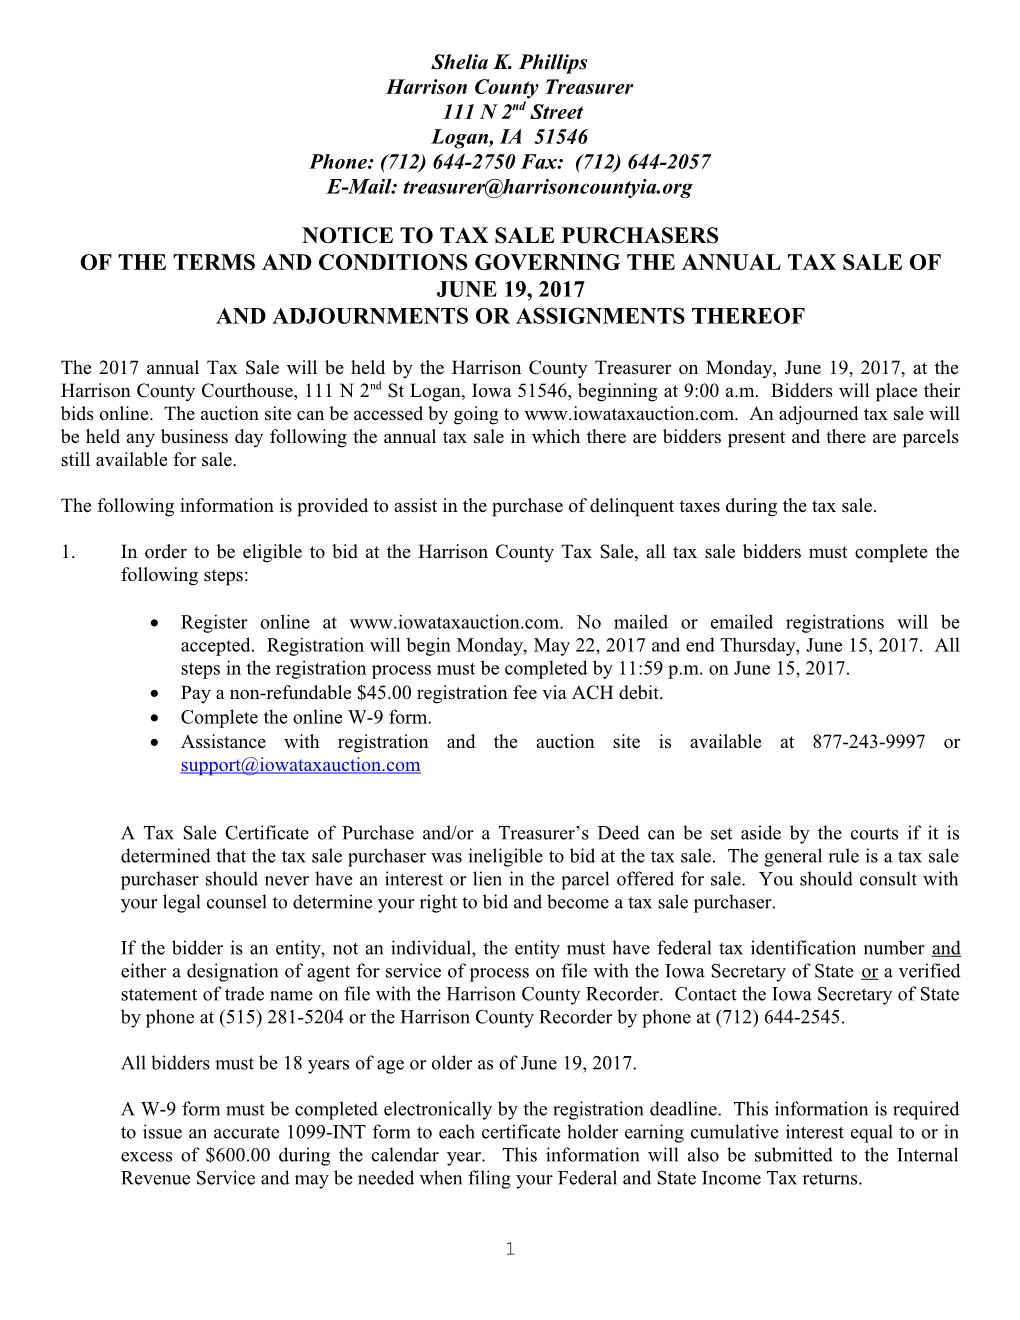 Notice to Tax Sale Purchasers